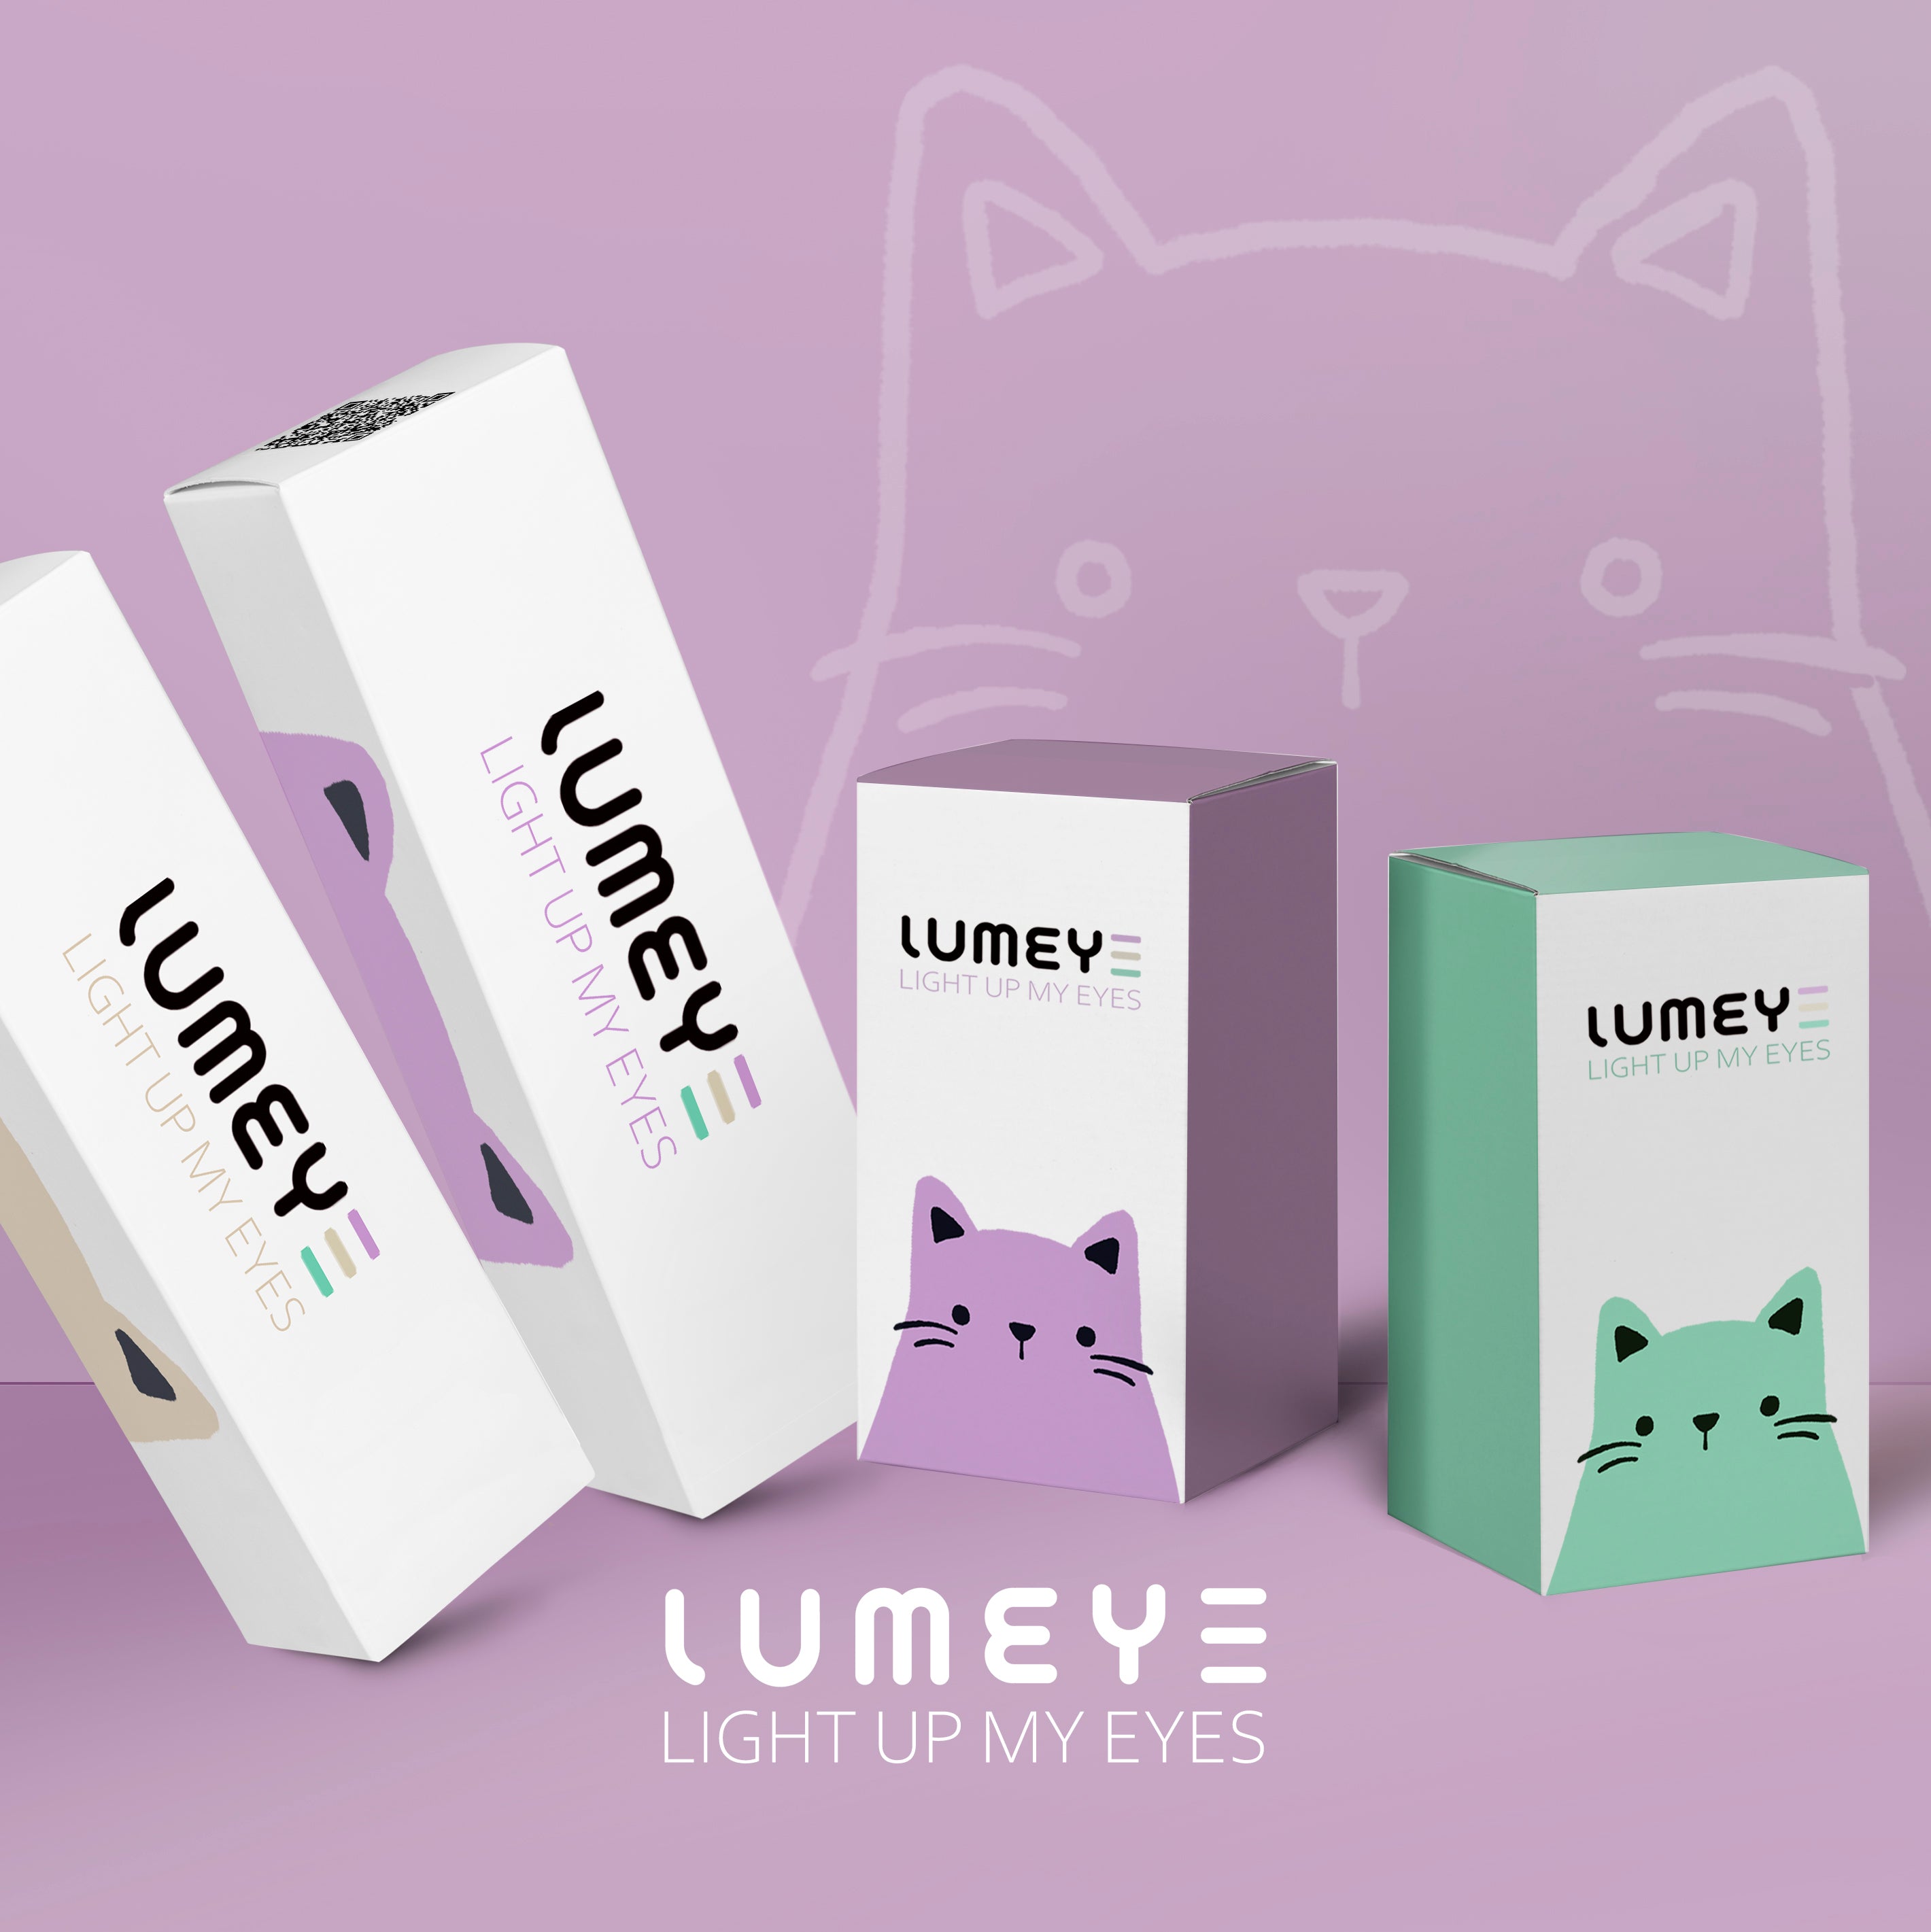 Best COLORED CONTACTS - LUMEYE Coconut Gray Colored Contact Lenses - LUMEYE